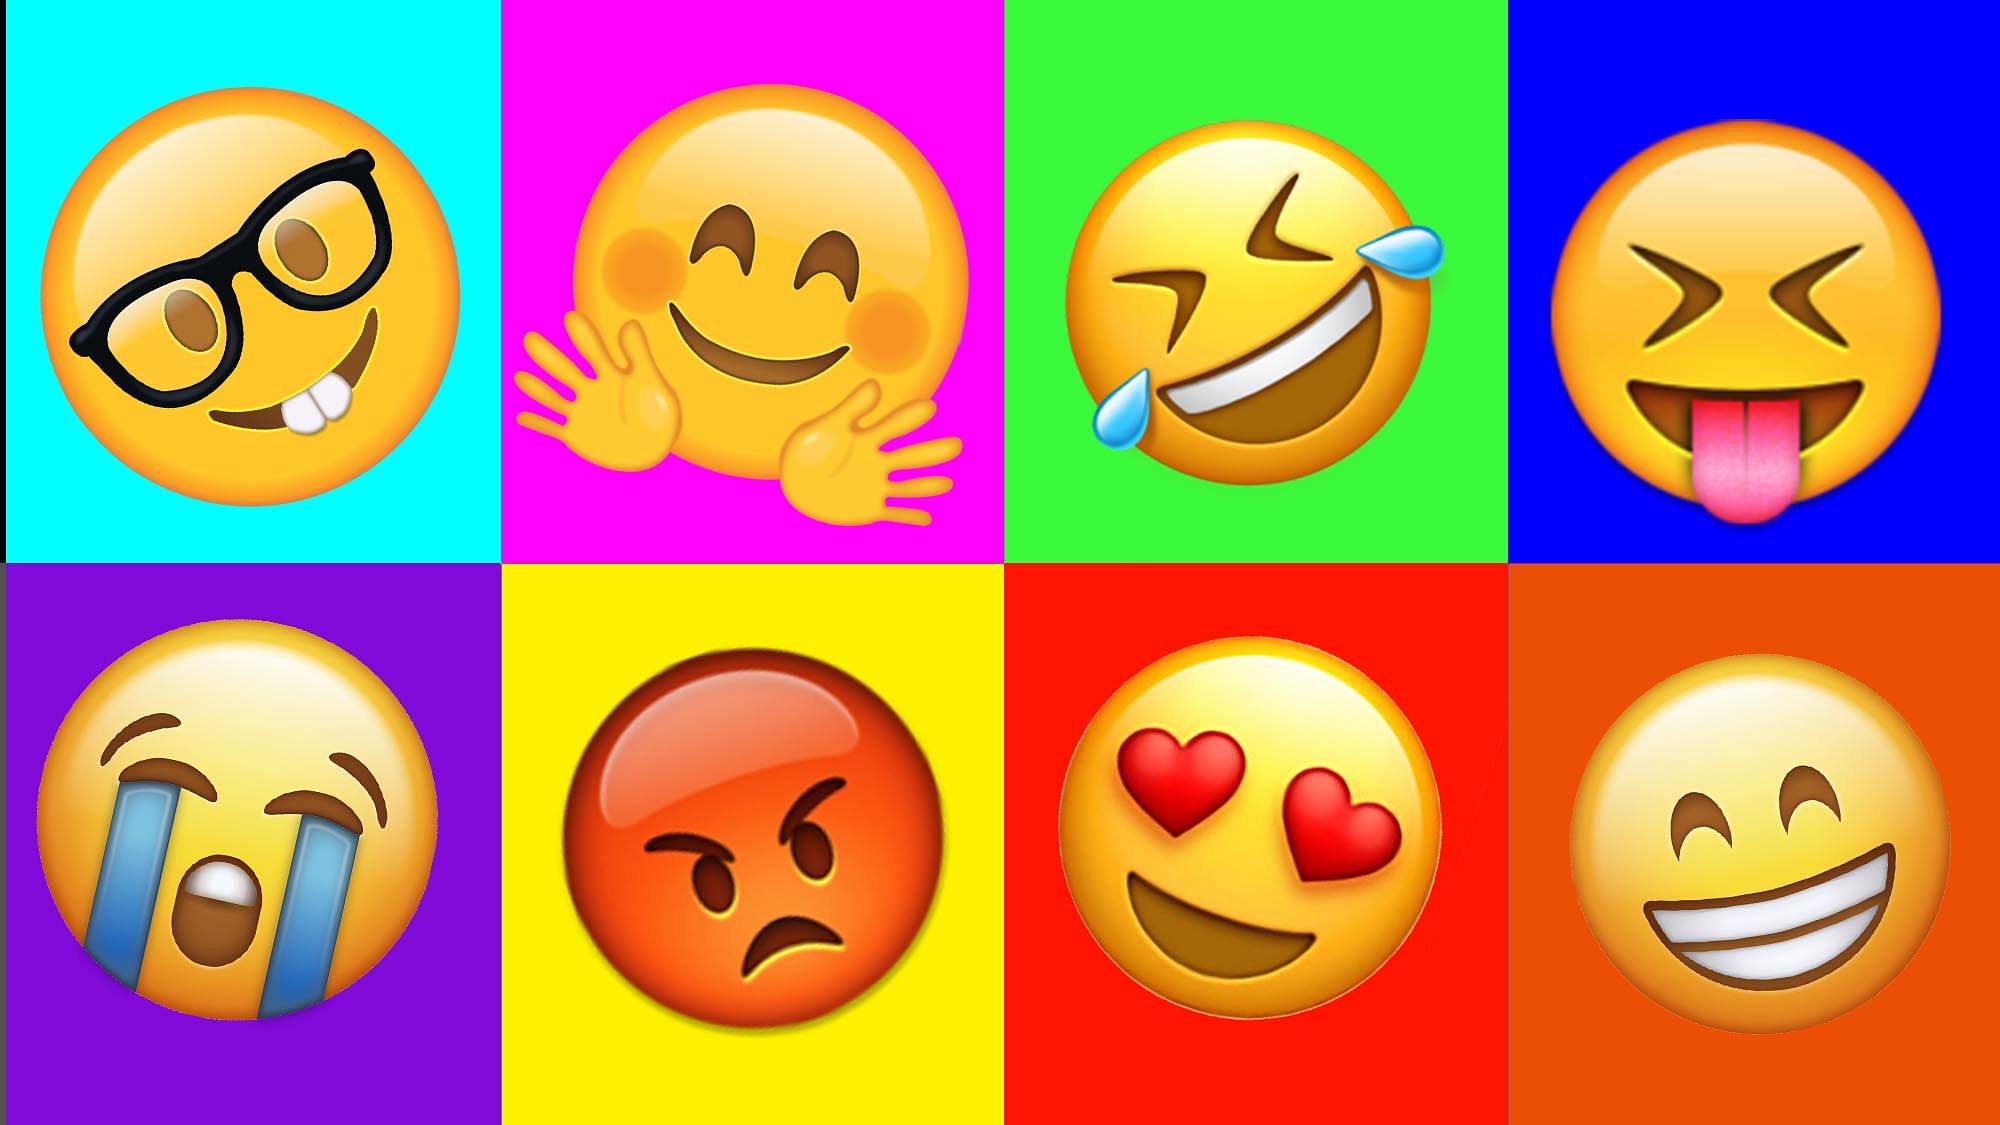 The Quint has some interesting additions to the world of emoji that we could use in our everyday life.